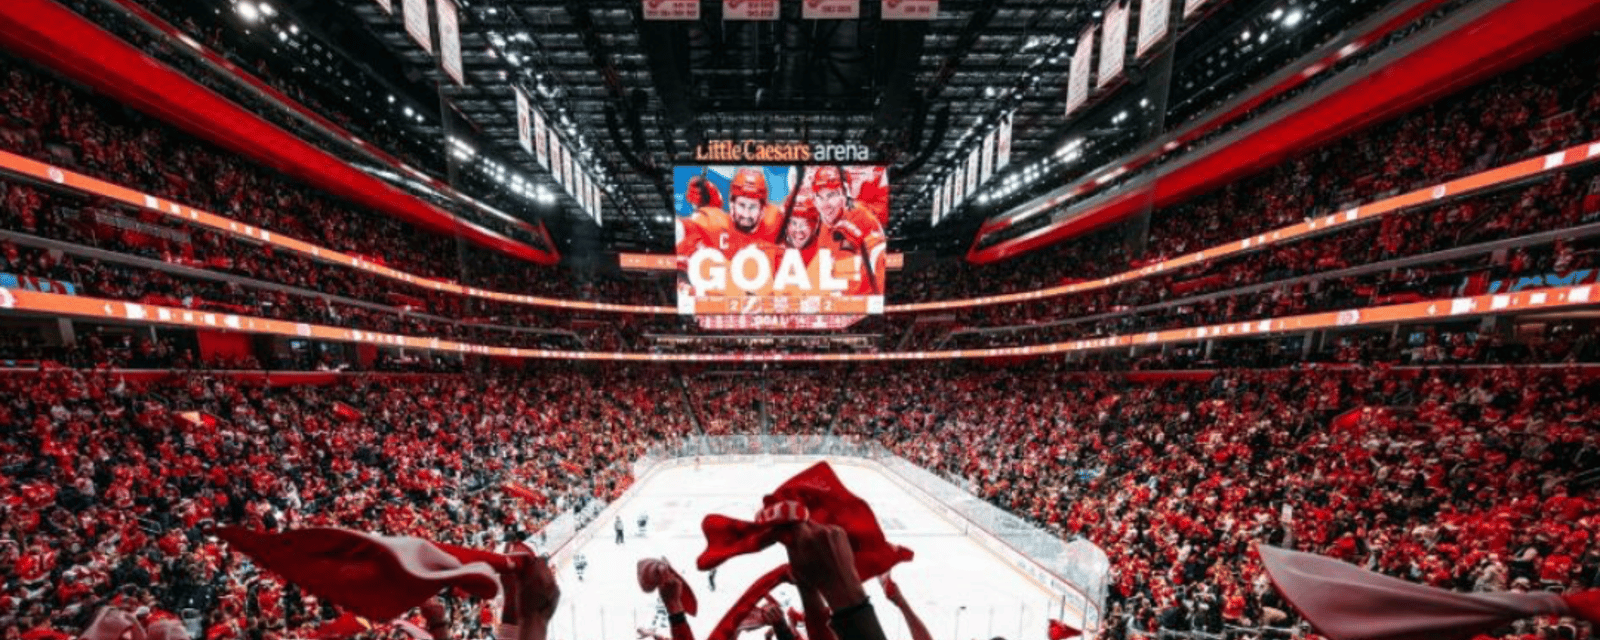 PWHL coming to Detroit's Little Caesars Arena 